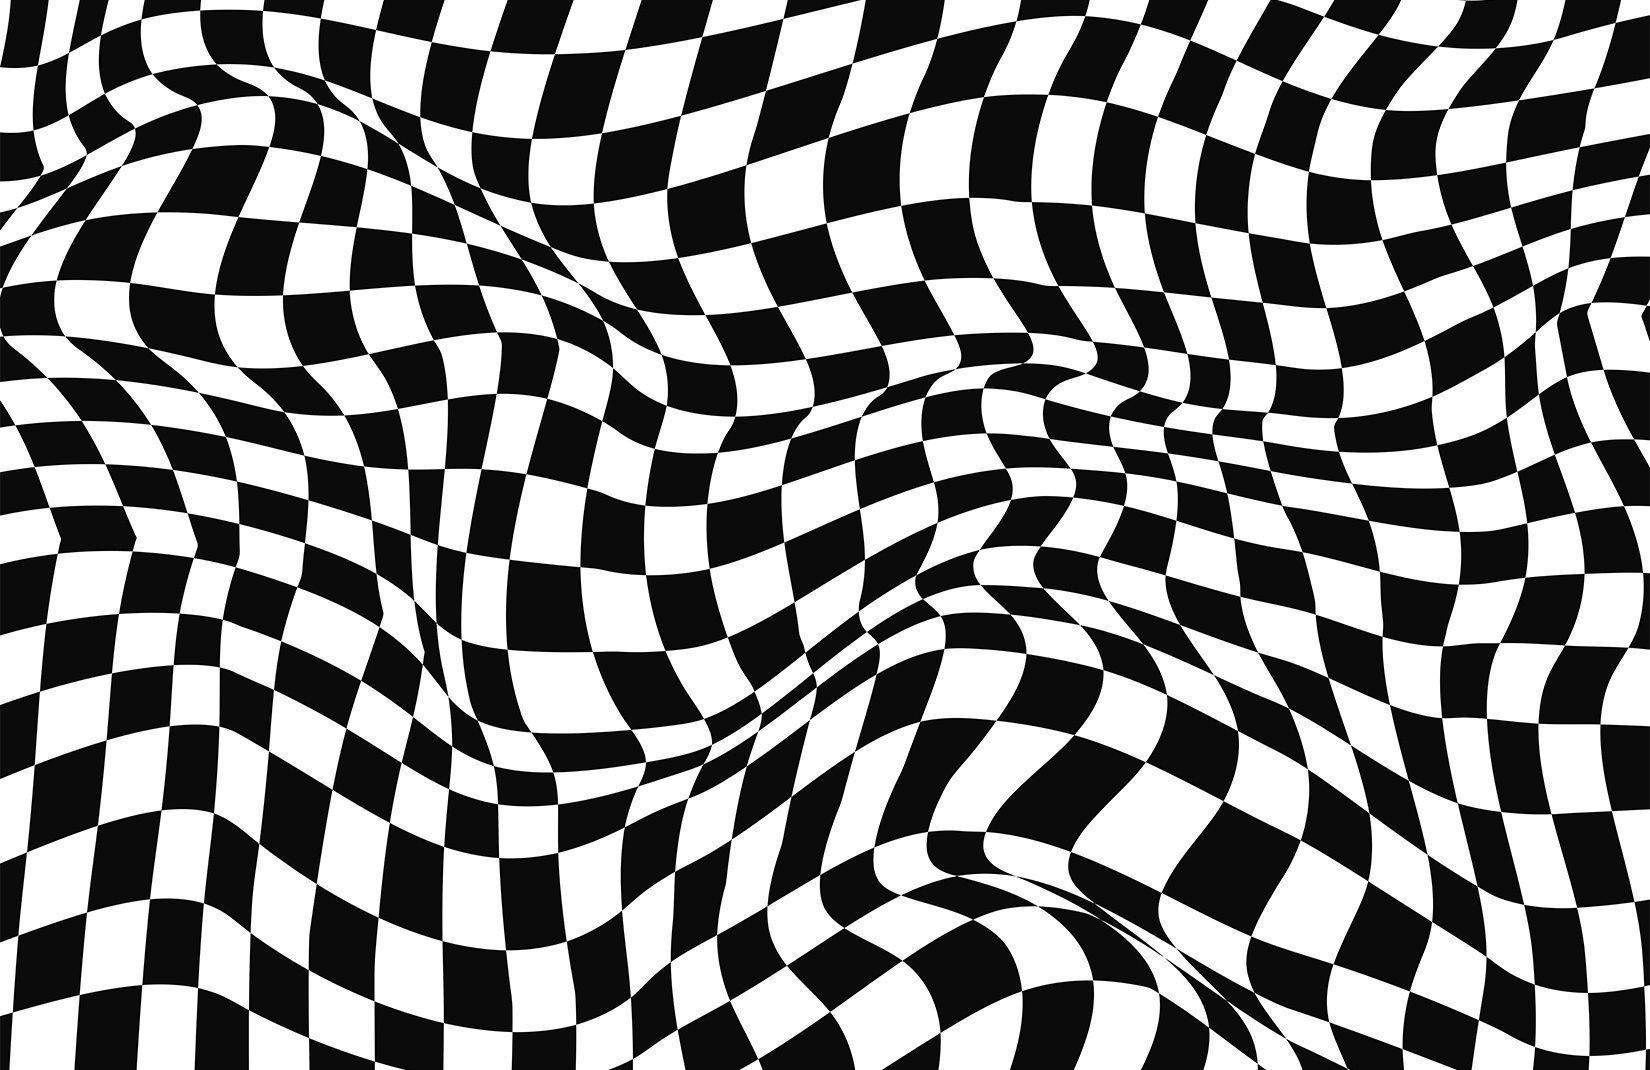 An abstract image of a distorted black and white checkered pattern - Black and white, gray, black glitch, pattern, checkered